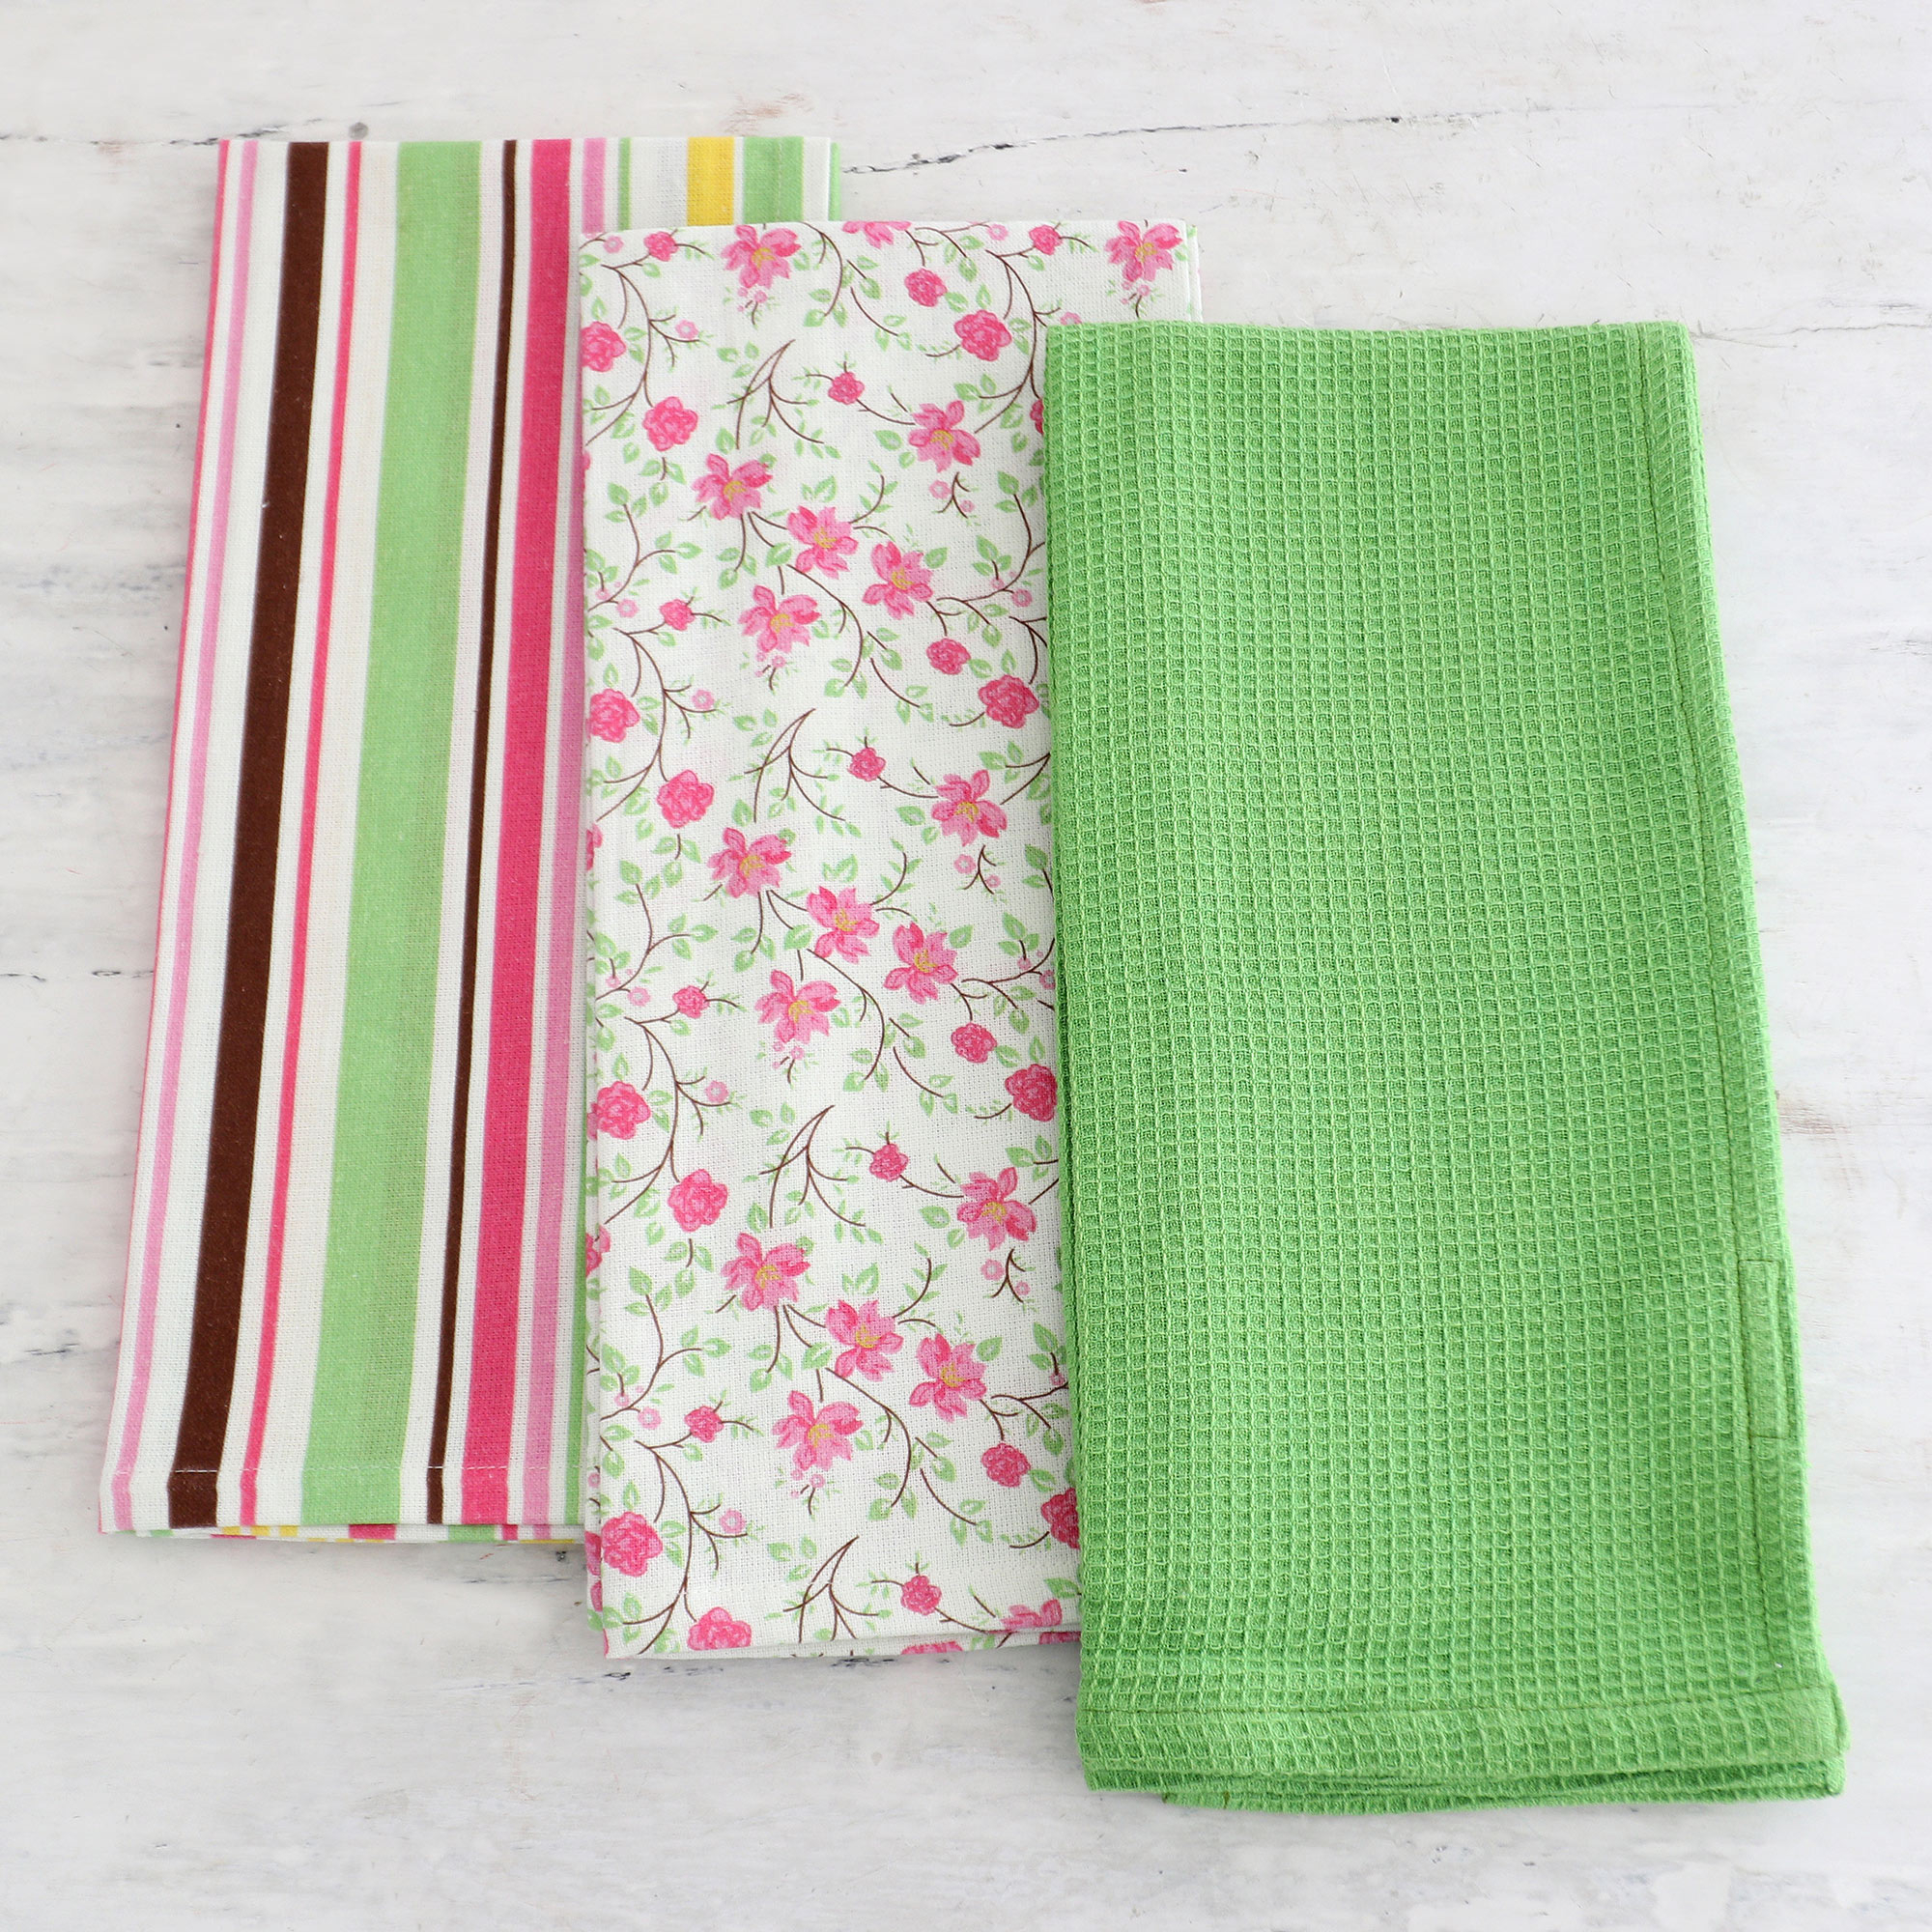 Set of 3 Pink Checkered Cotton Dish Towels with Laces - Pink Affection